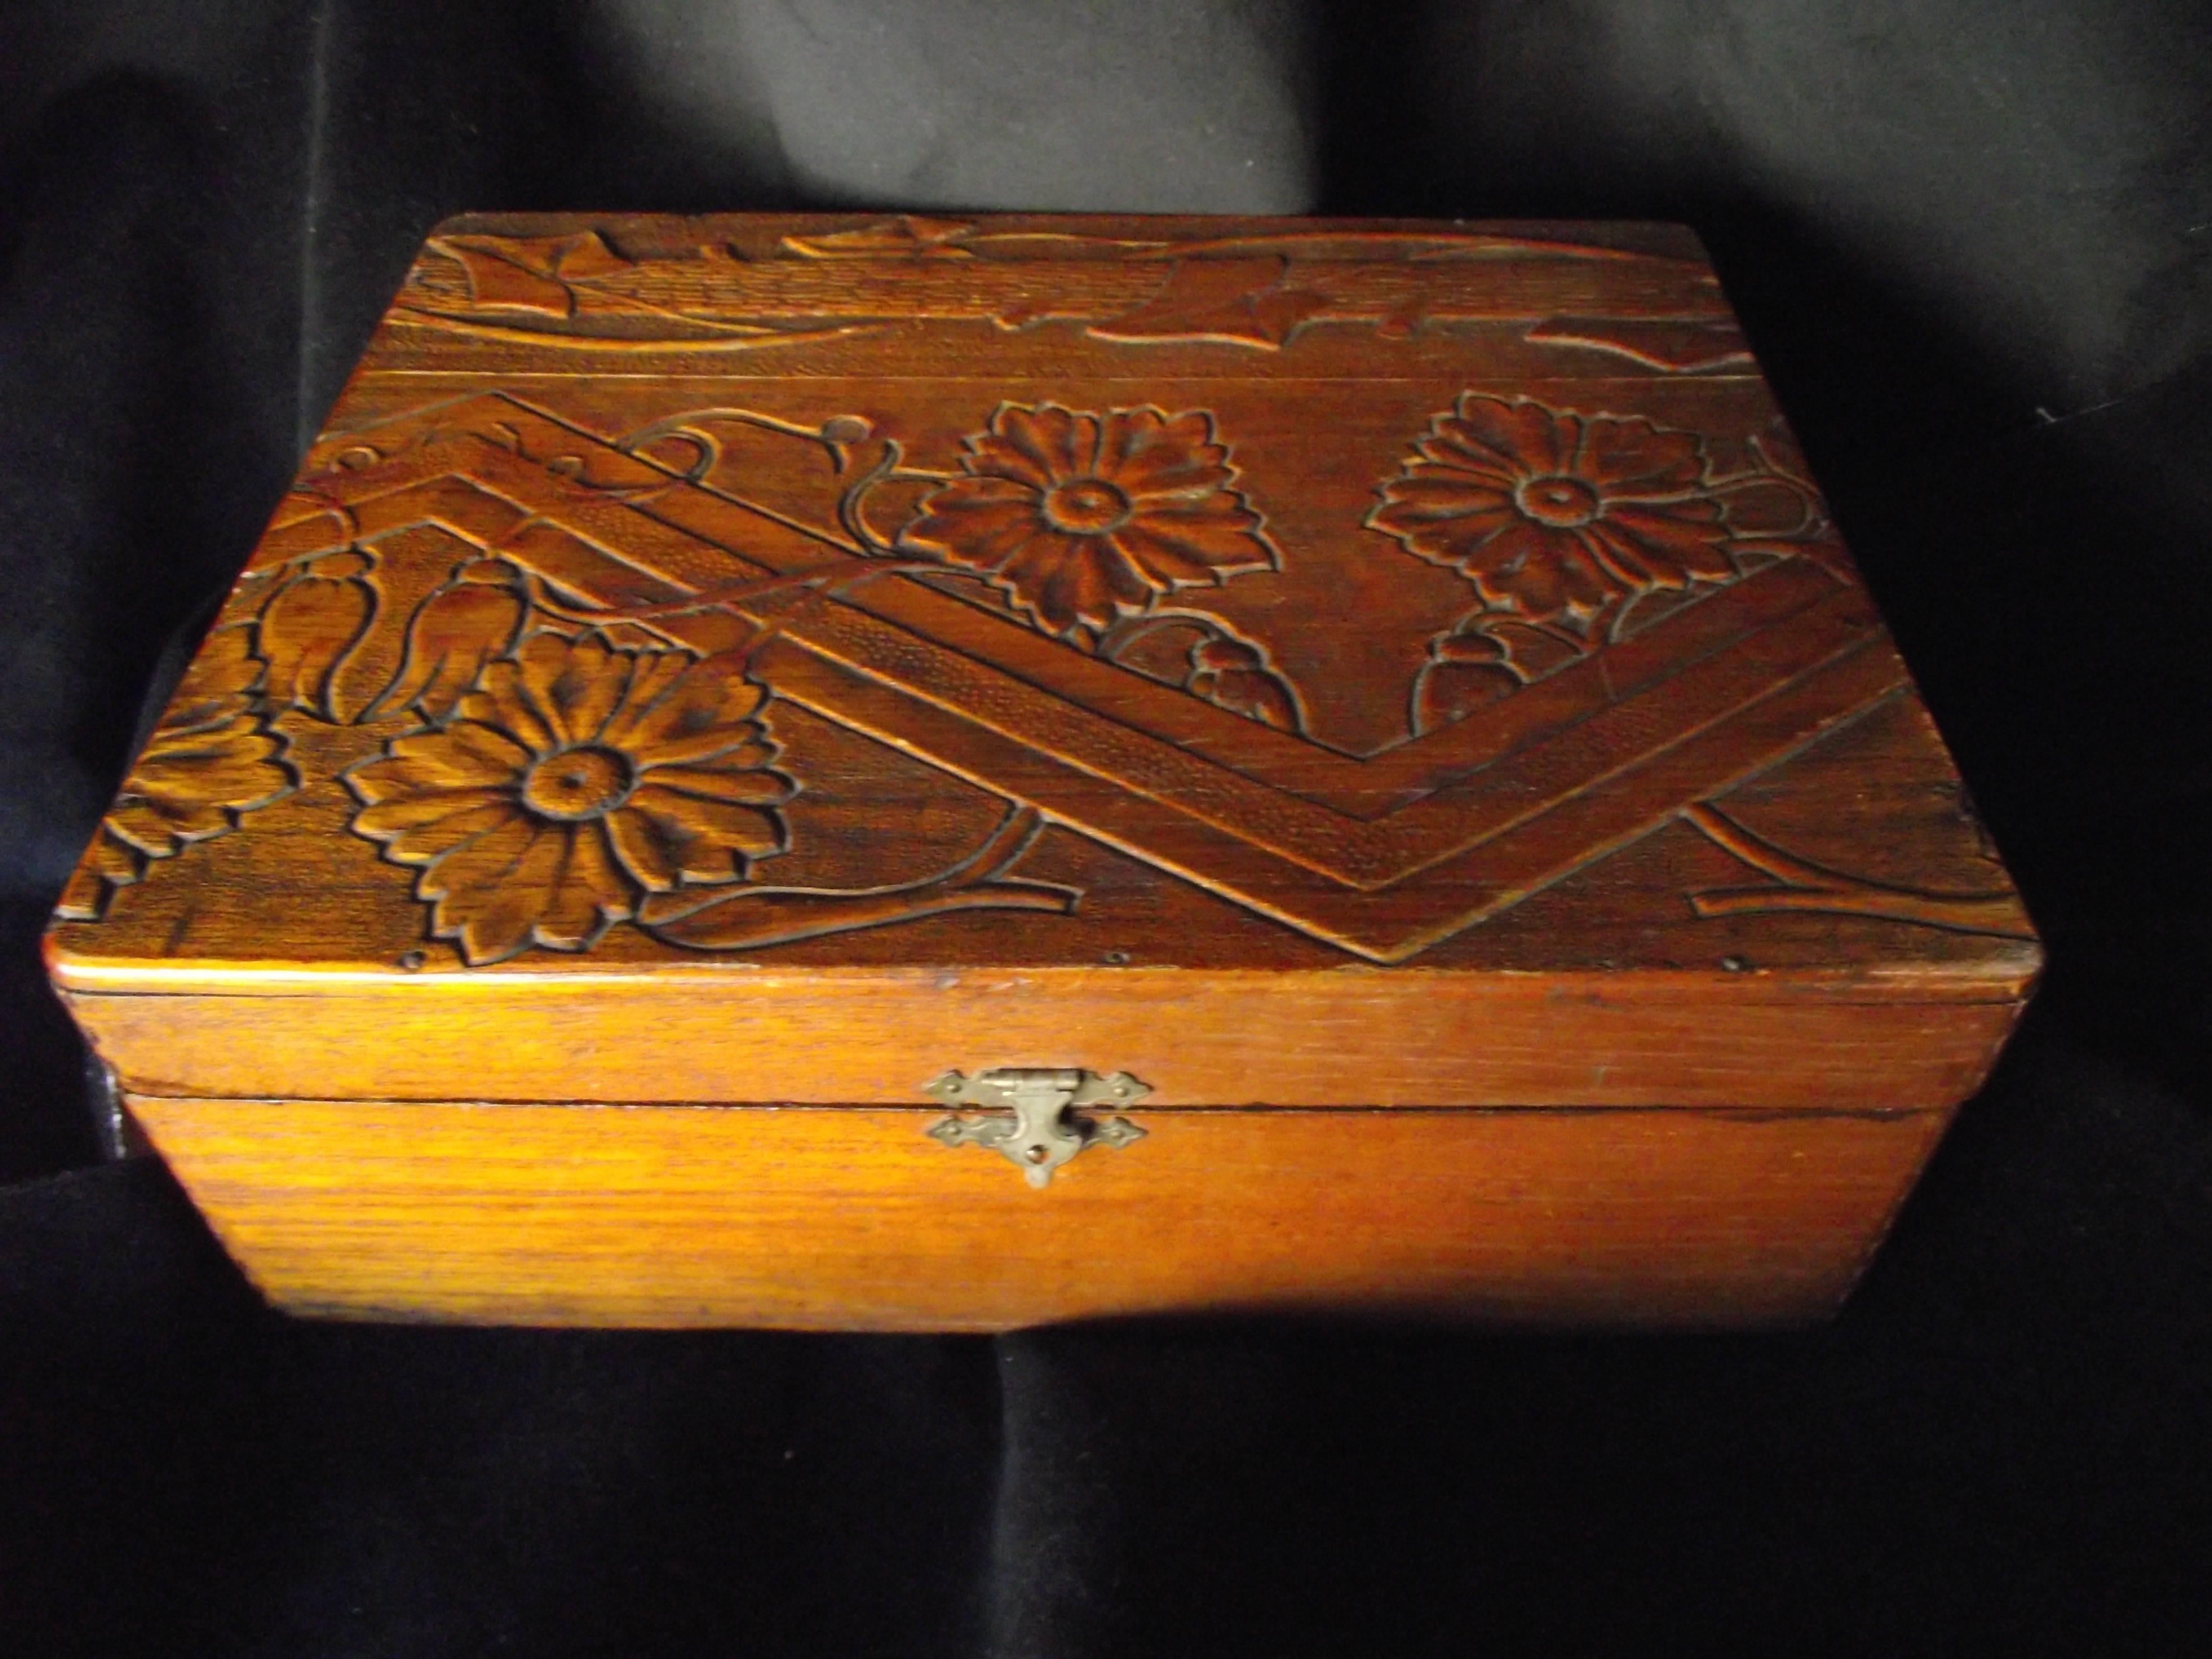 This beautiful box appears to be an early Art Deco box. It features a typical Deco angle design but also includes floral and ivy designs. The over all design is reminiscent of late Victorian designs by William Morris. 

The craftsmanship that into